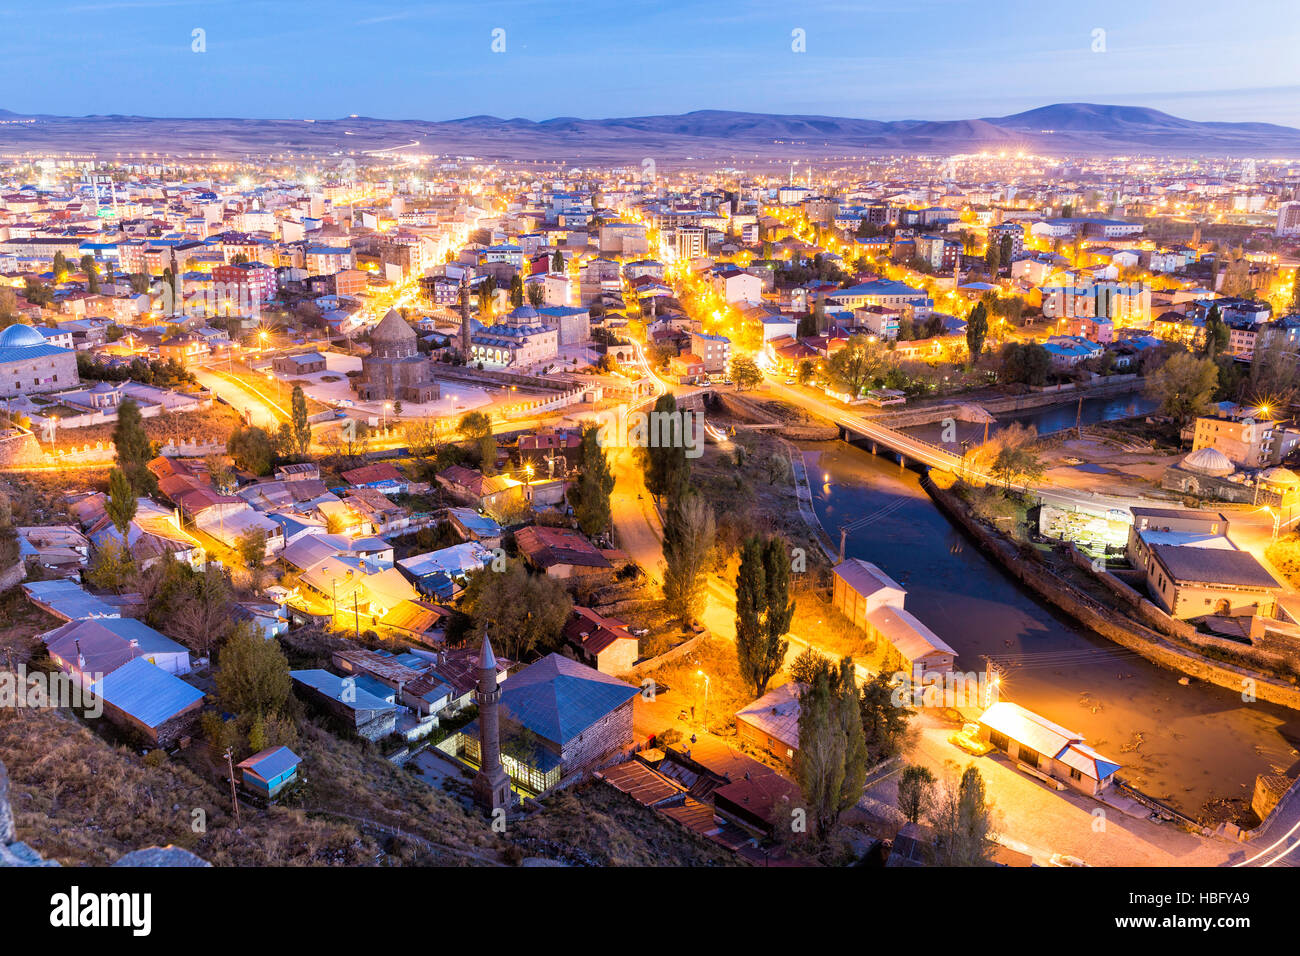 Twilight view of Kars city through the castle of Kars. Kars is a city in northeast Turkey and the capital of Kars Province. Stock Photo